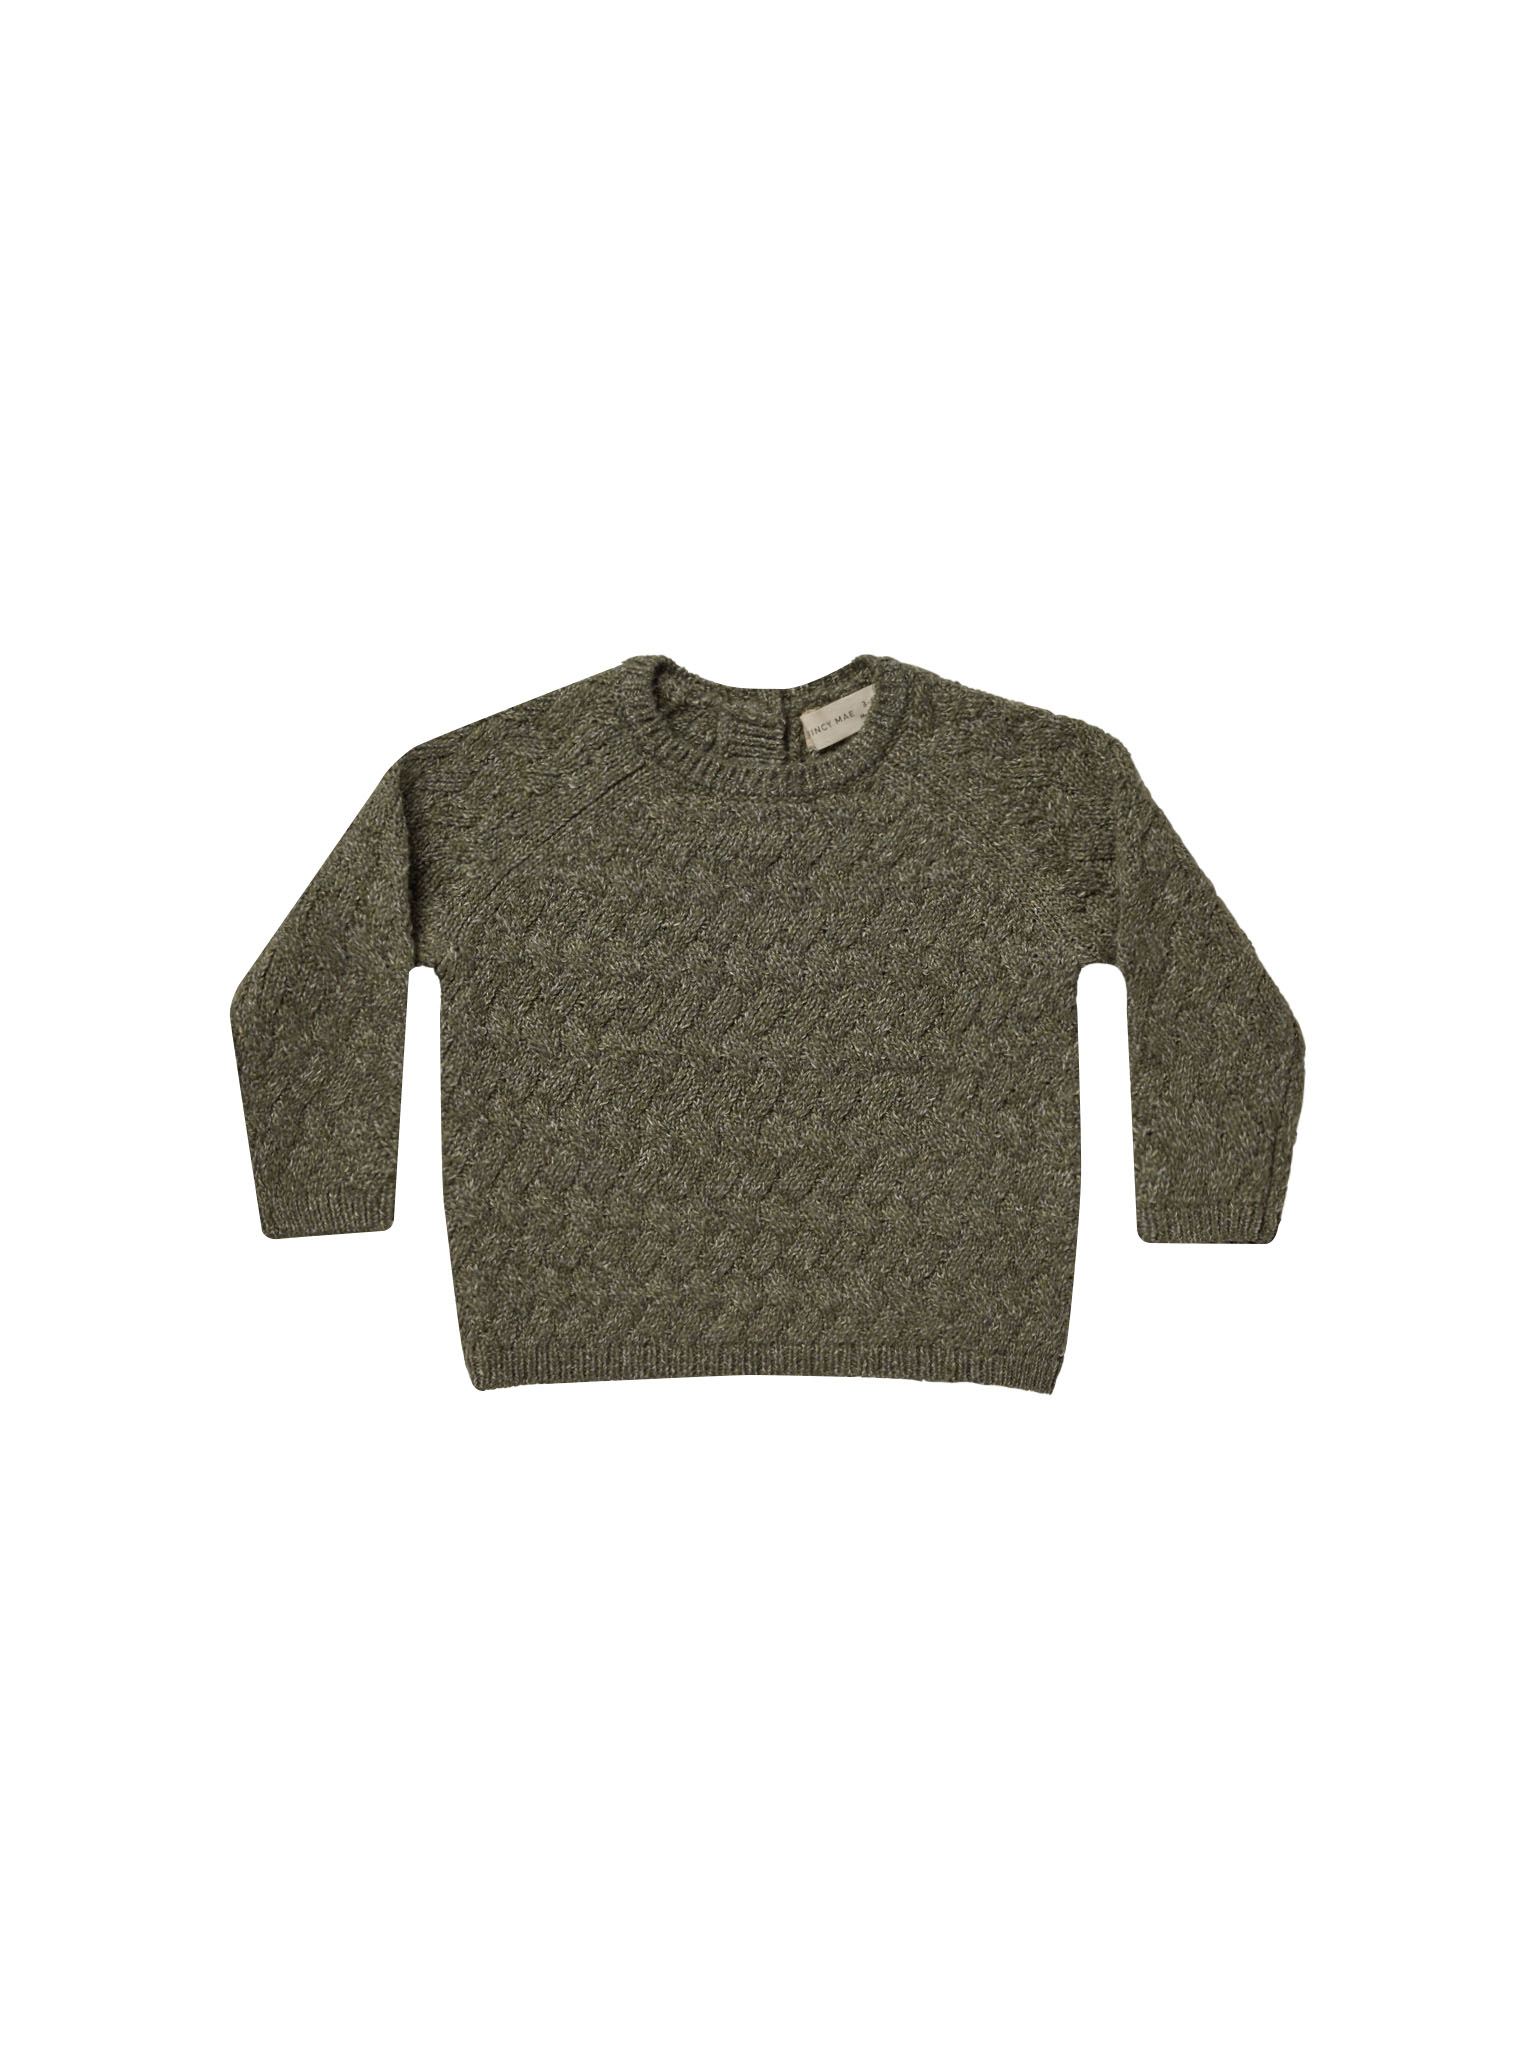 Quincy Mae Knit Sweater In Forest